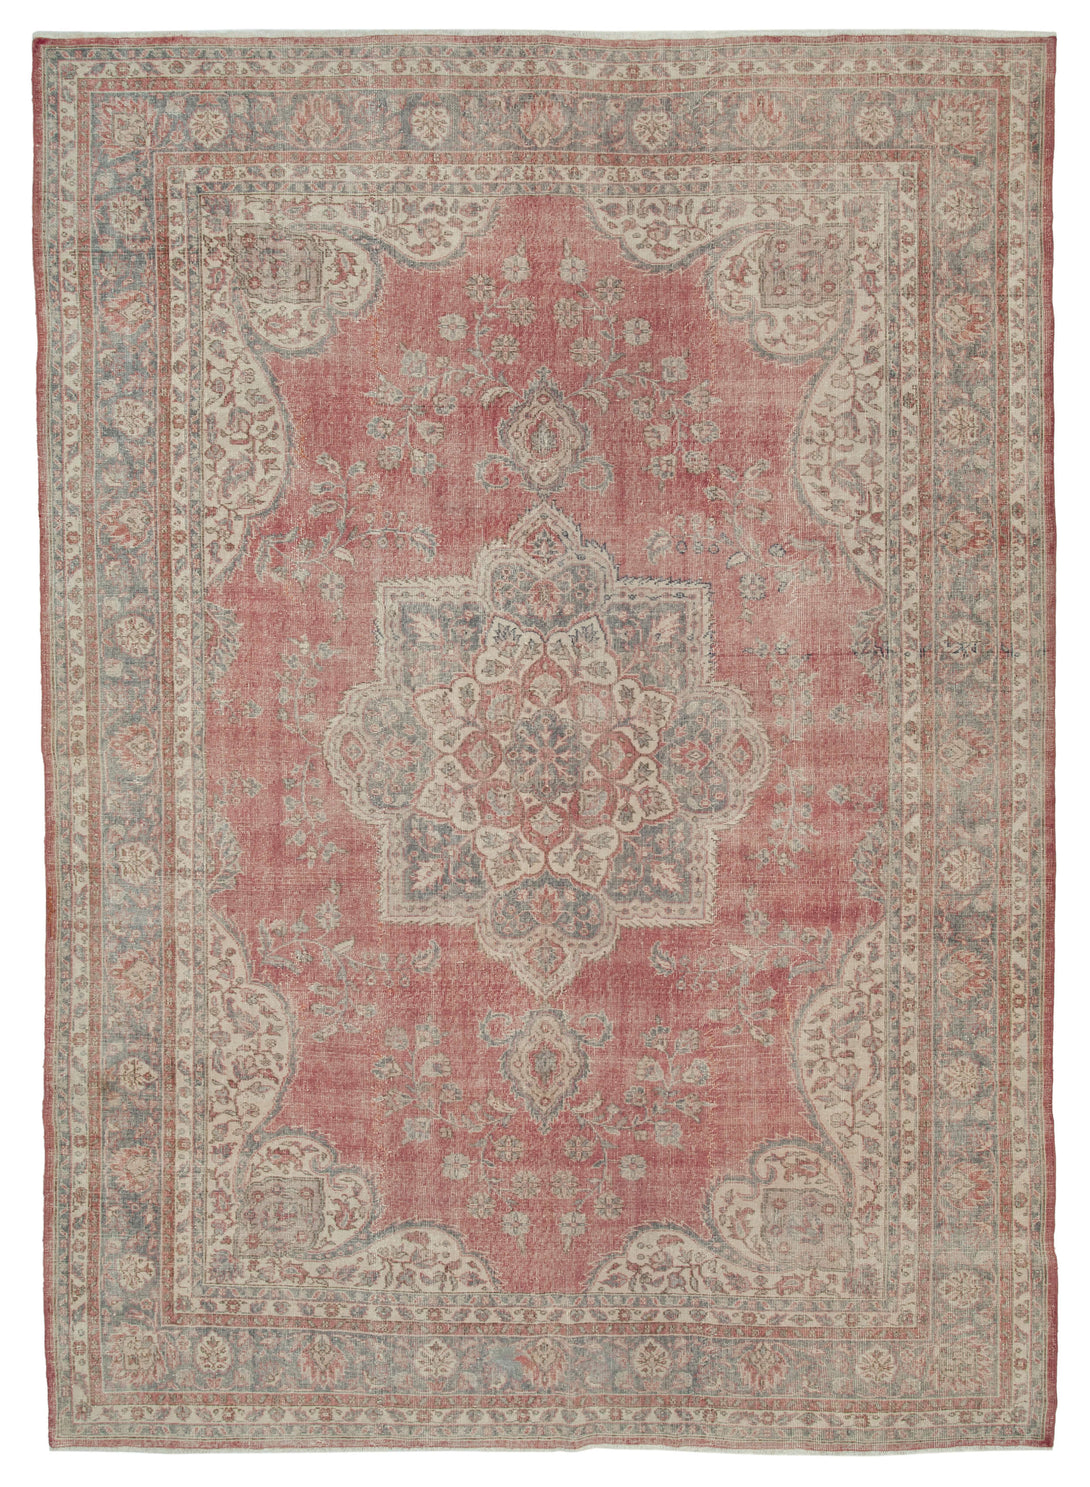 Handmade White Wash Area Rug > Design# OL-AC-33956 > Size: 8'-4" x 11'-7", Carpet Culture Rugs, Handmade Rugs, NYC Rugs, New Rugs, Shop Rugs, Rug Store, Outlet Rugs, SoHo Rugs, Rugs in USA